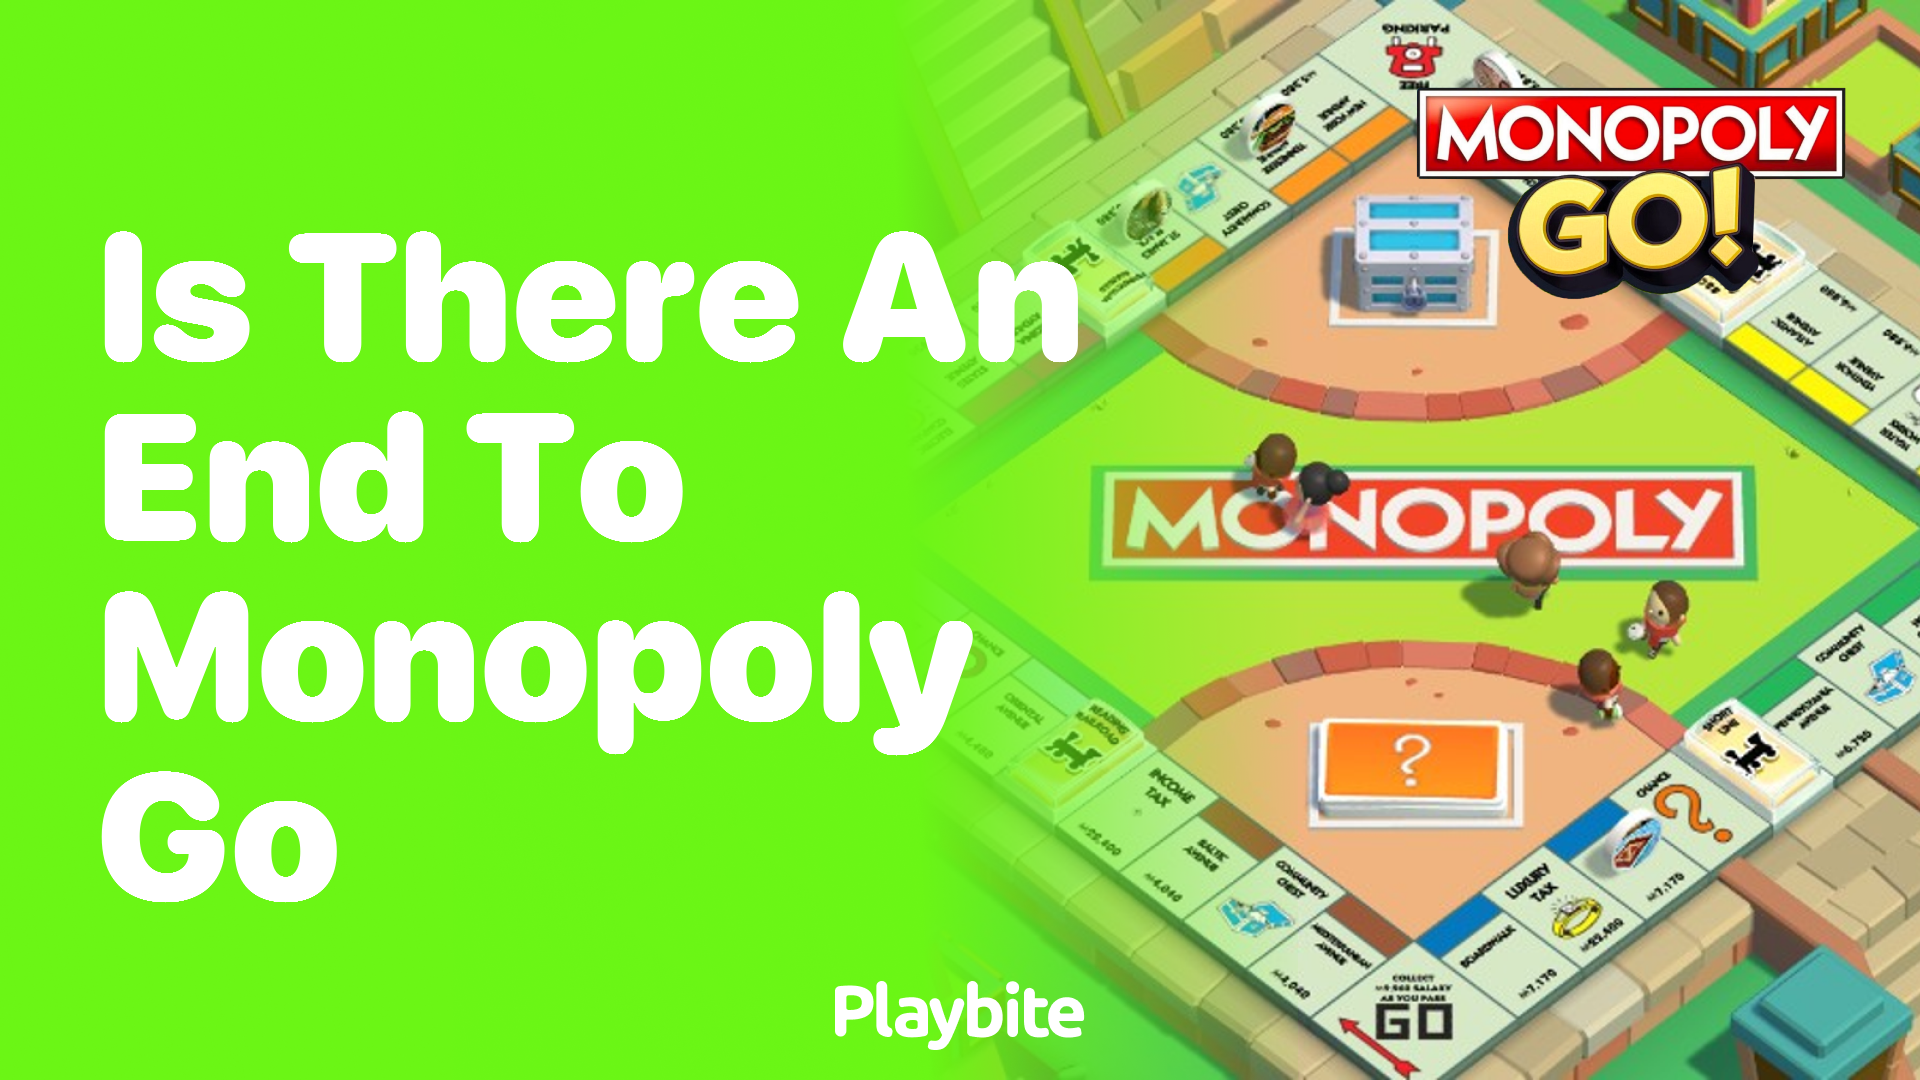 Is There an End to Monopoly Go?